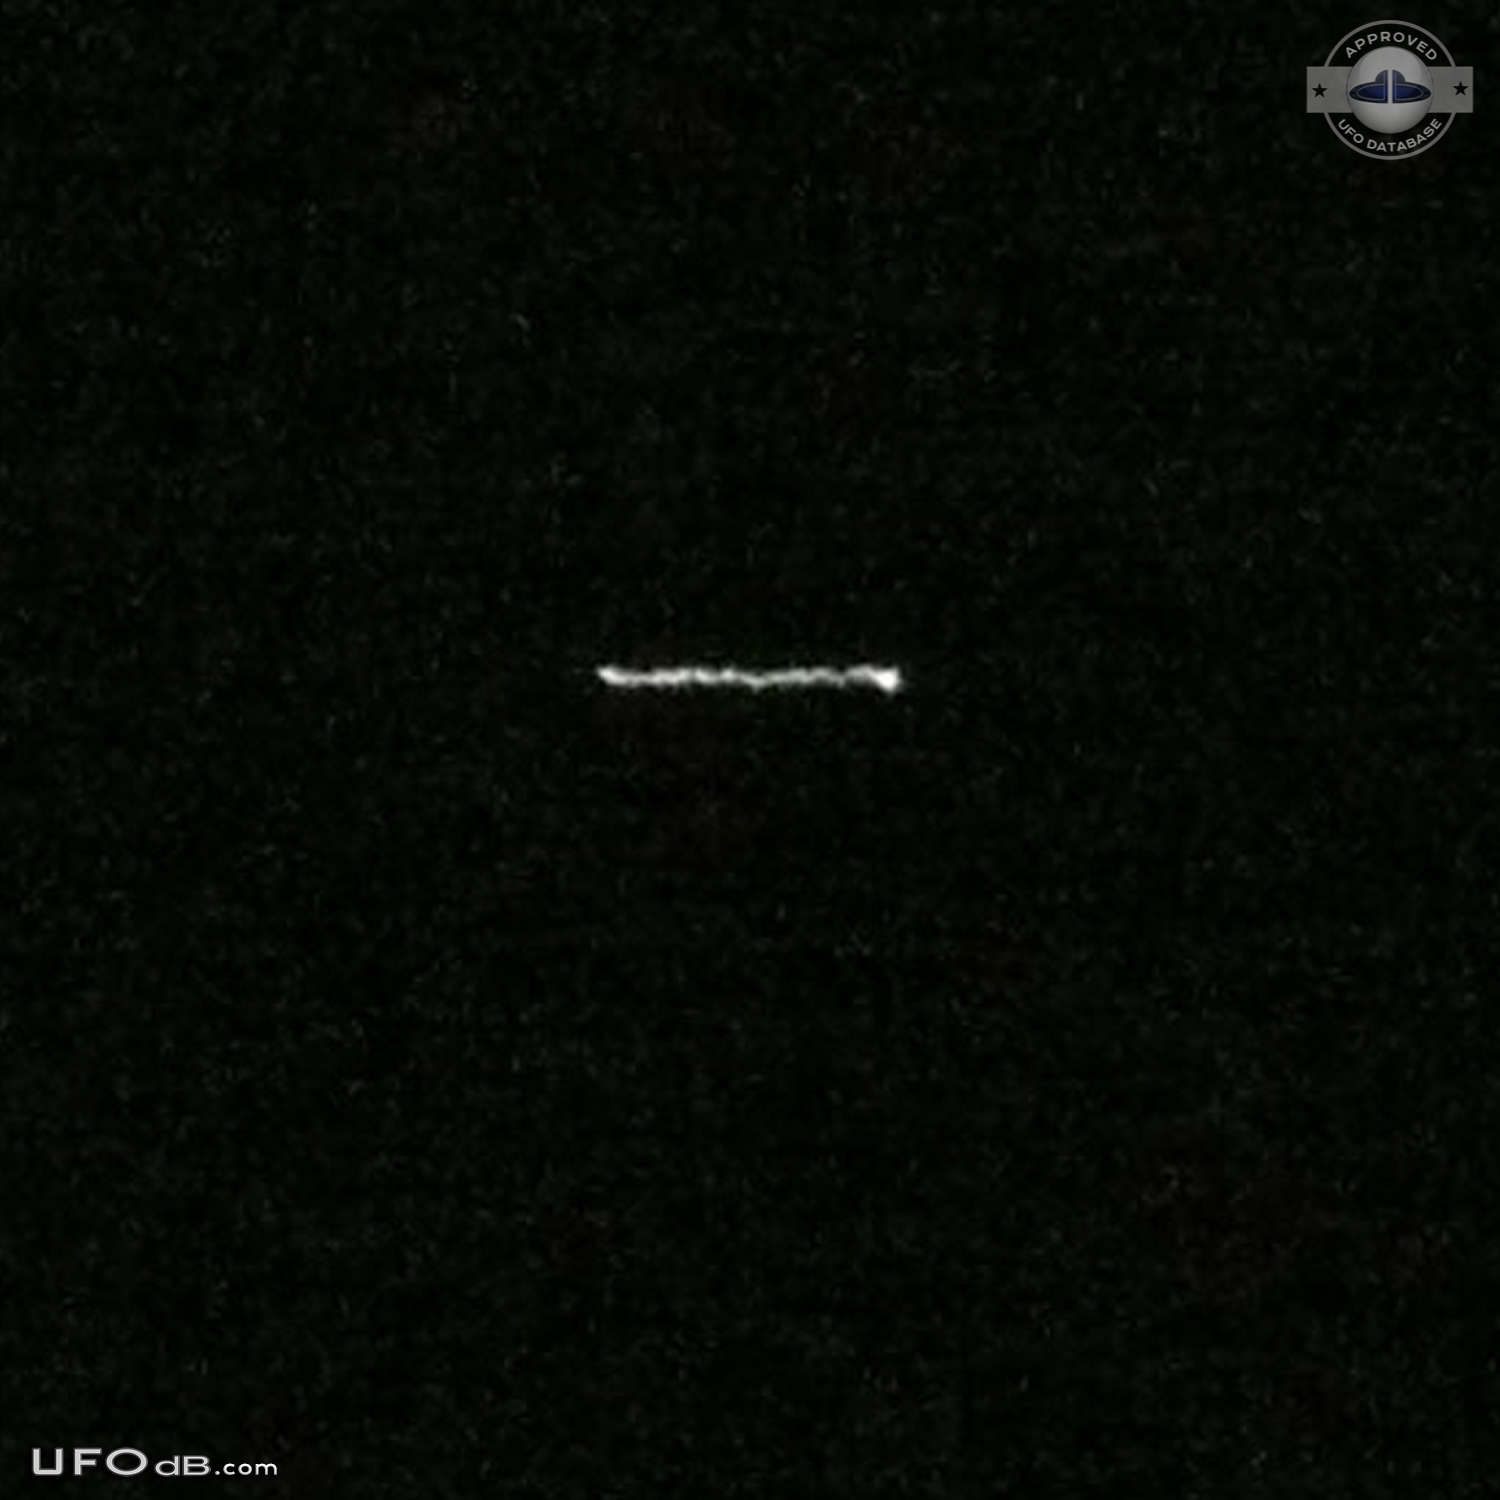 Straight line of white light UFO changing direction over Chichen Itza UFO Picture #635-4